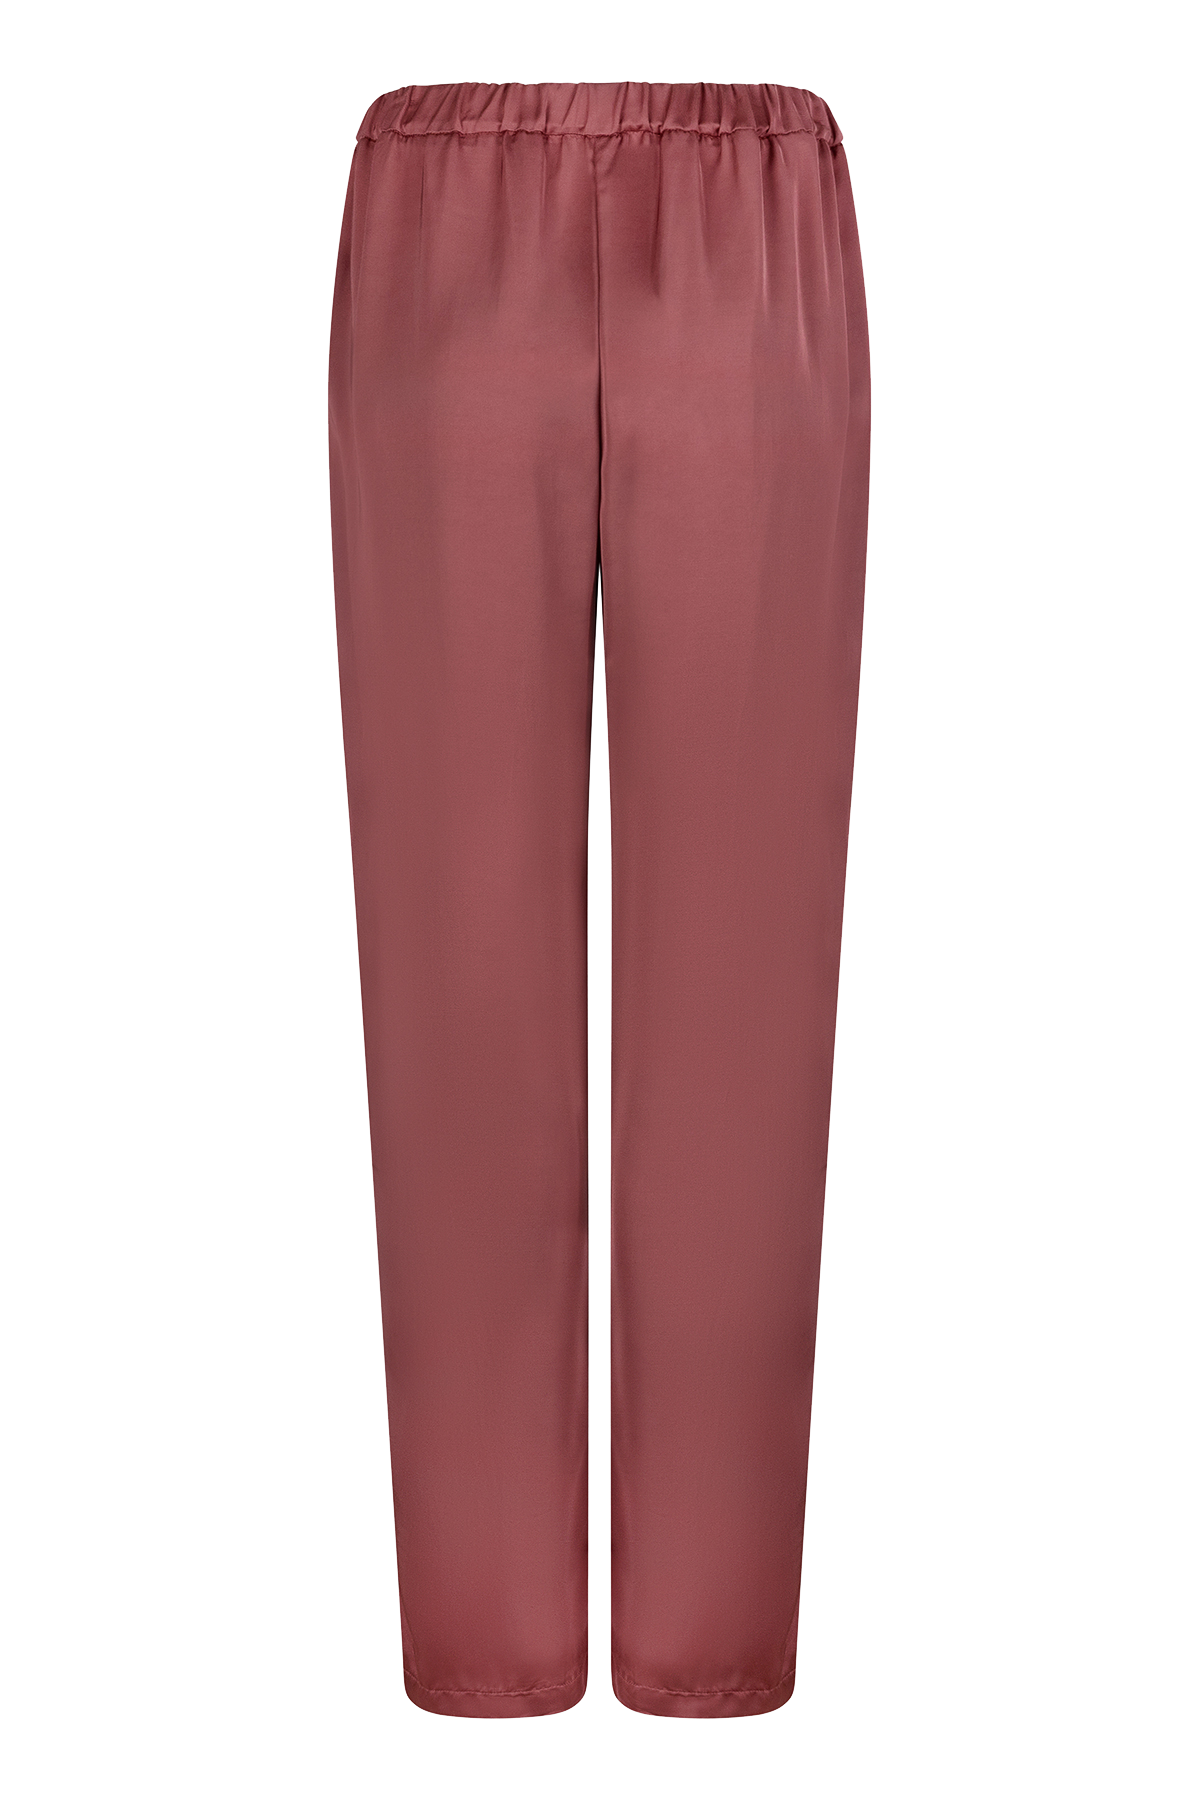 RALOME TROUSERS ROSEWOOD